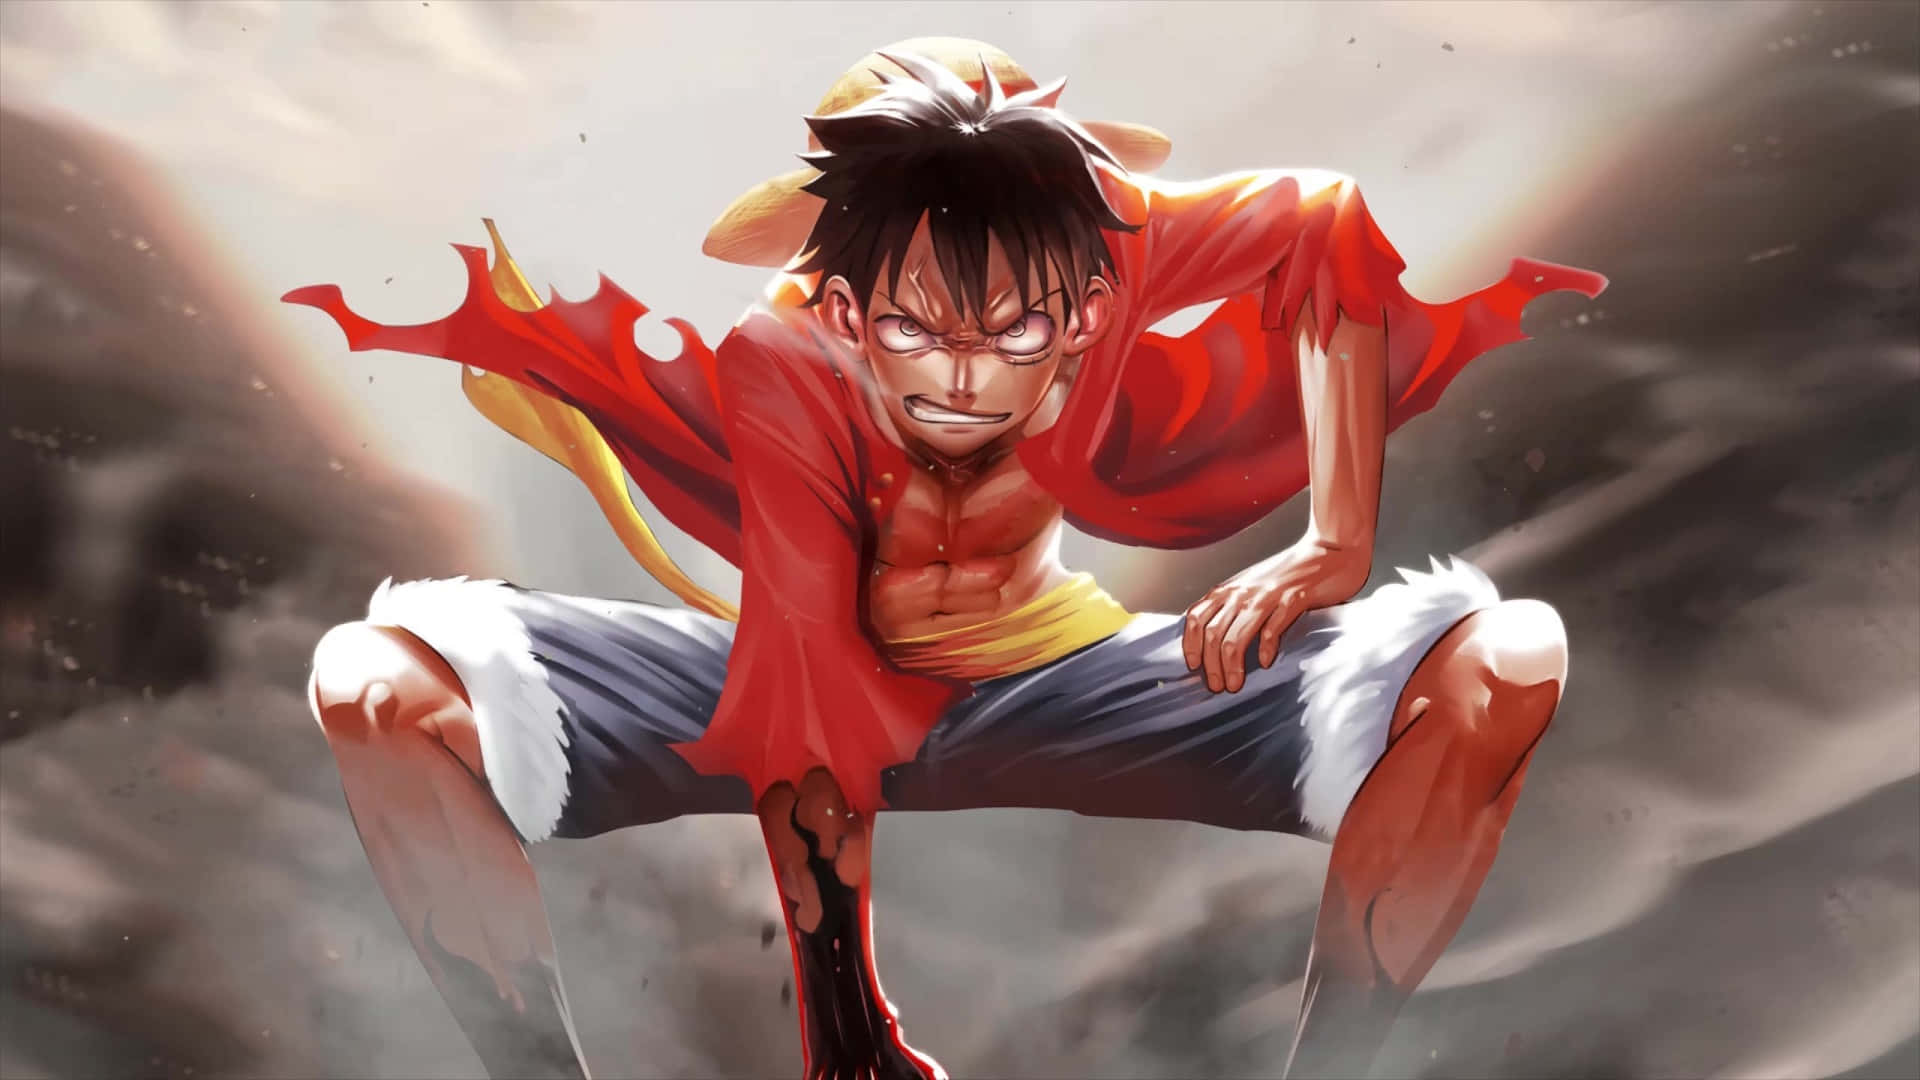 Luffy fights for justice and becomes the Pirate King